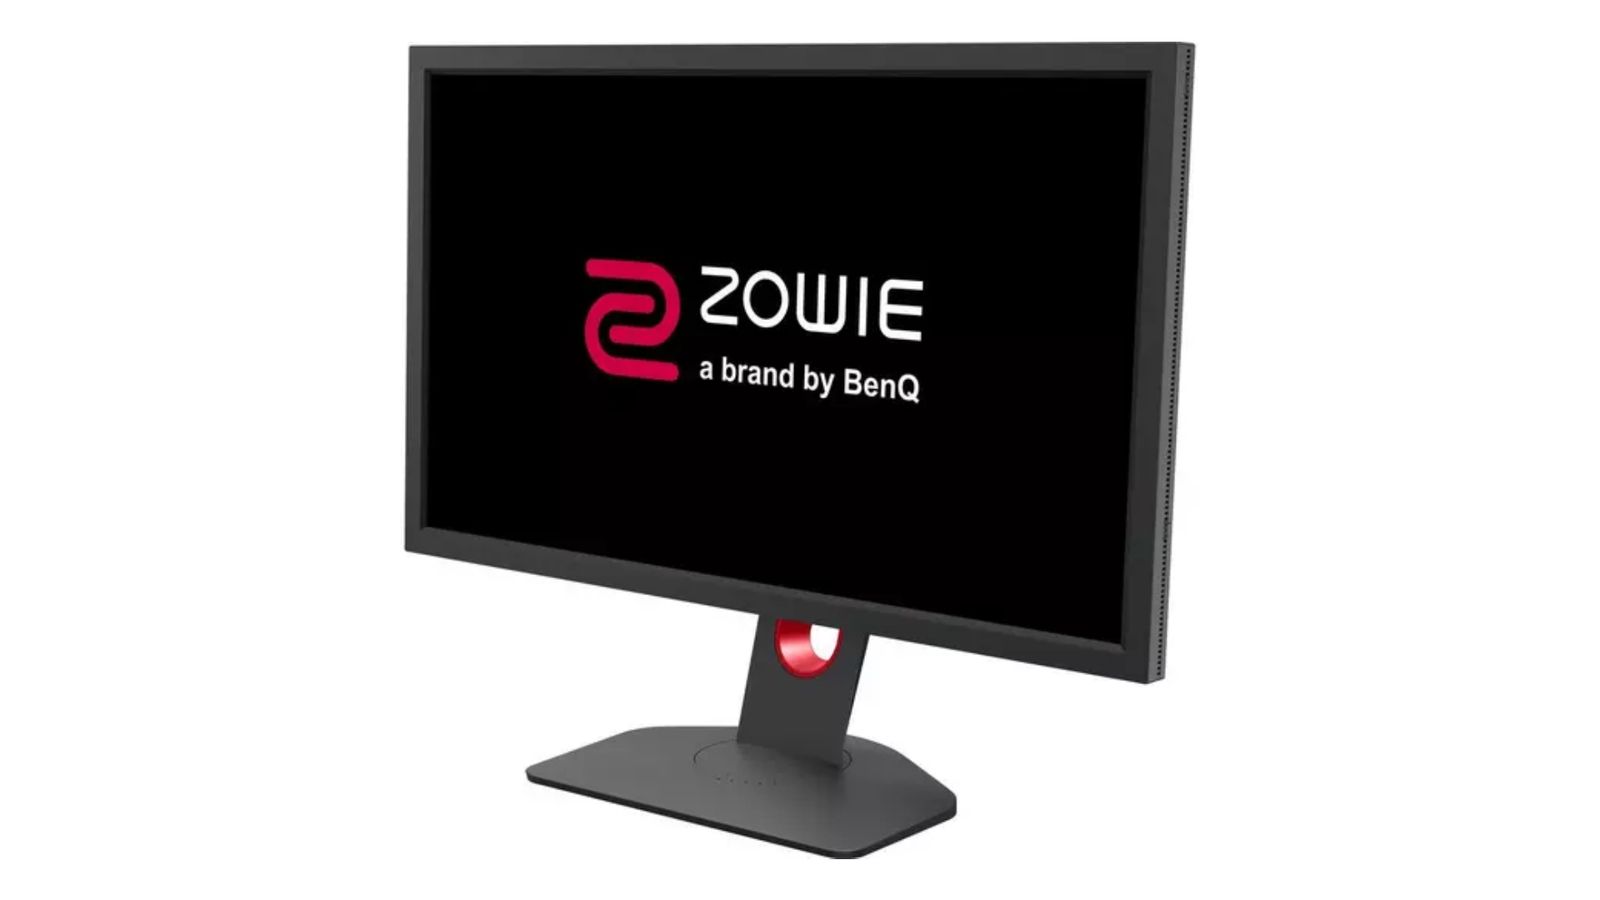 BenQ Zowie XL2411K product image of a dark grey monitor with a red and white Zowie logo on the display.